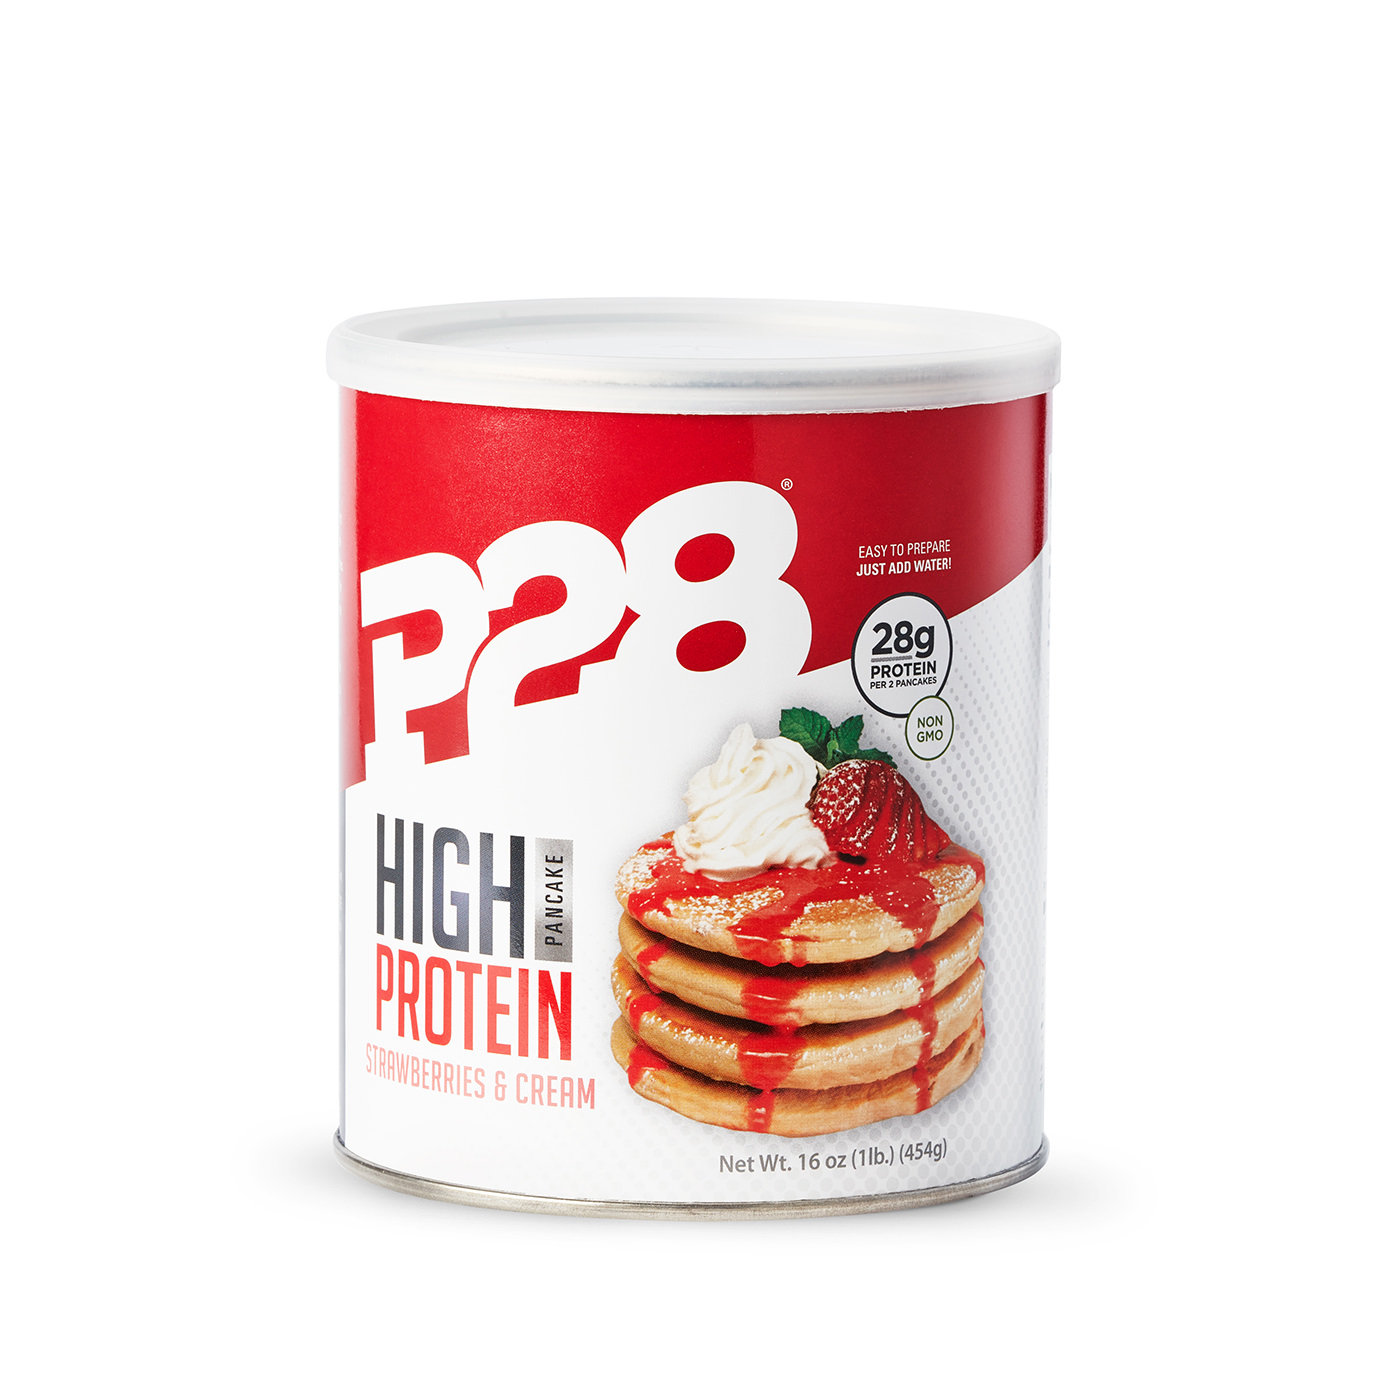 High Protein Pancake Packaging Photo by our Product Photographer